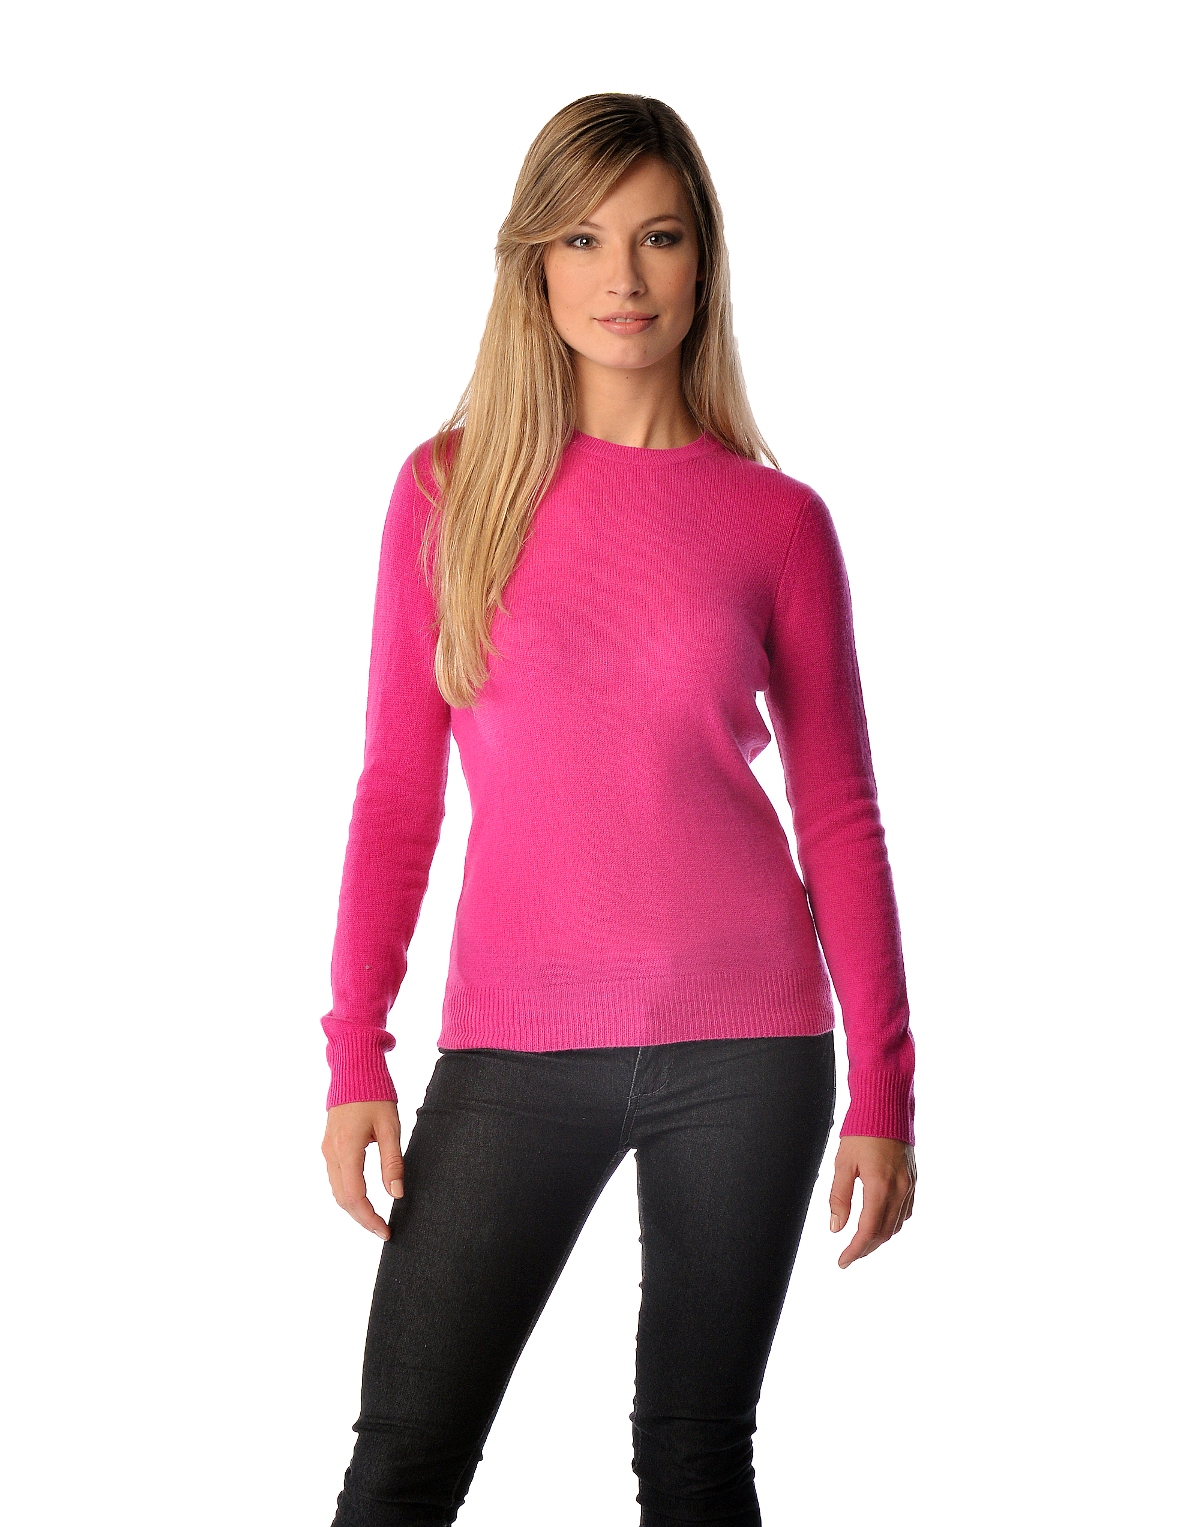 Pure Cashmere Crew Neck Spring Sweater for Women (Magenta Pink, Large)